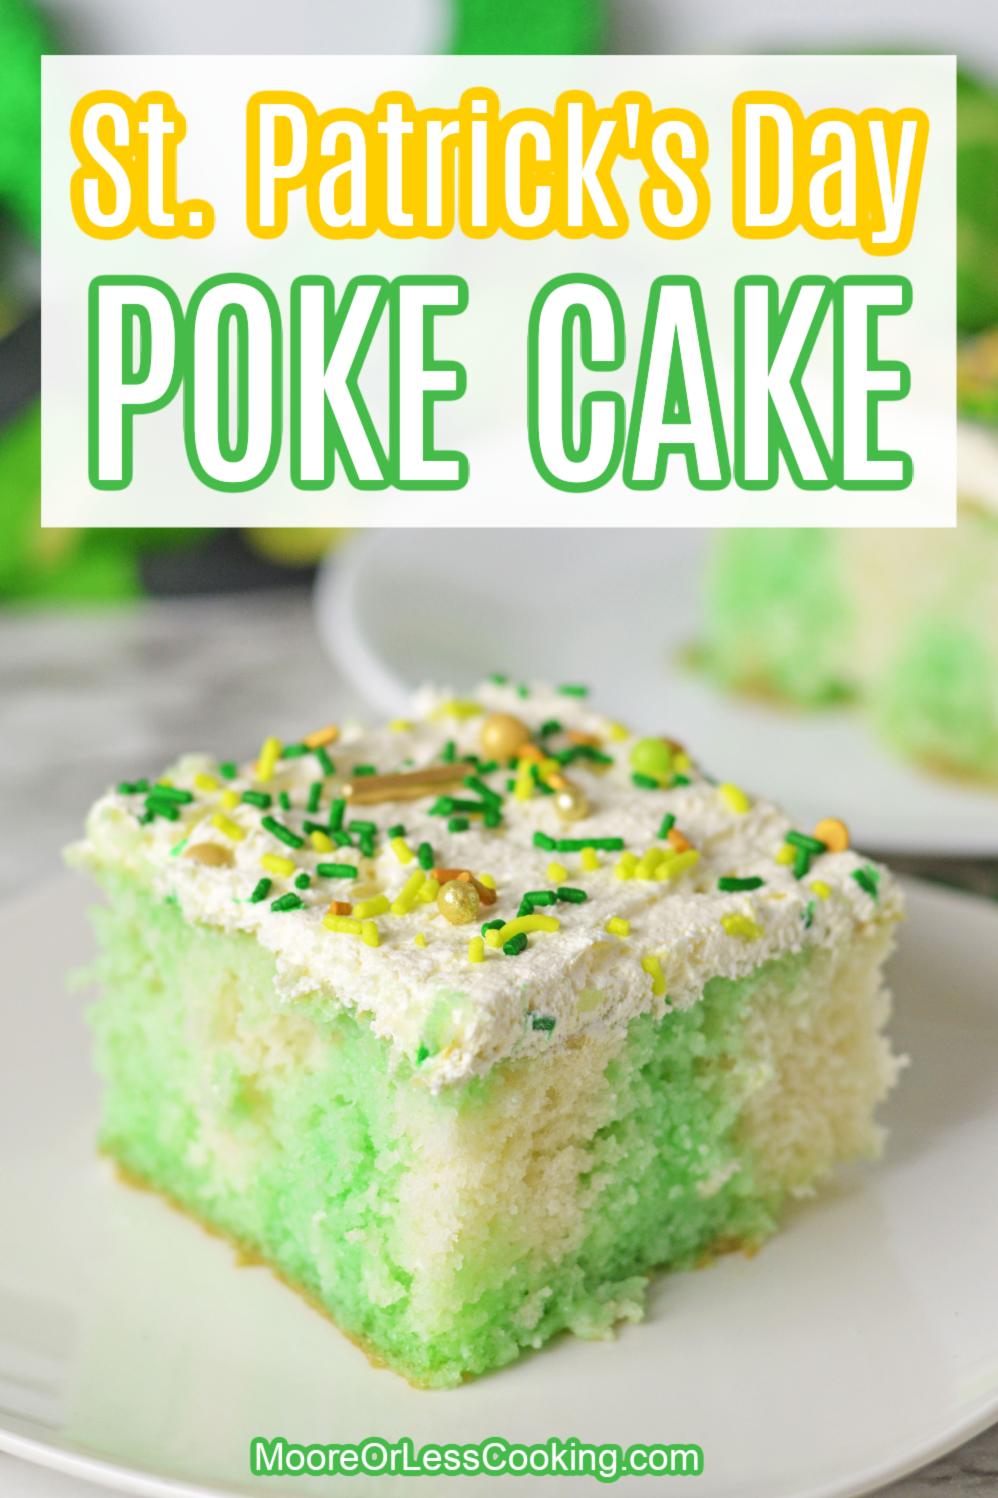  Every bite of this Pistachio Poke Cake is loaded with vibrant green goodness.